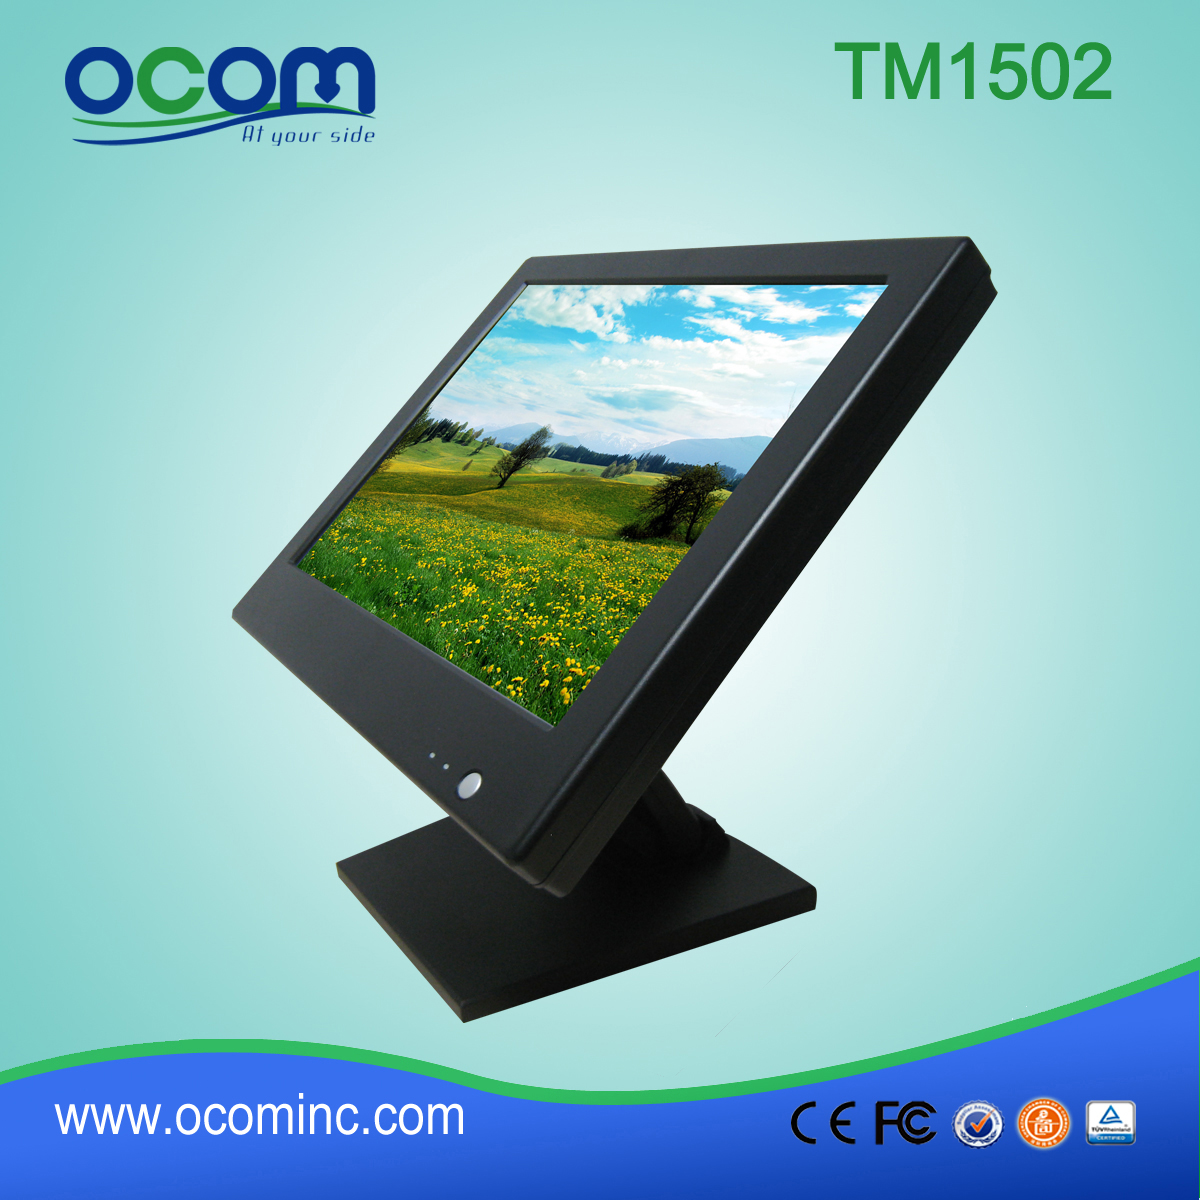 TM1502 impermeable 15 "LCD Touch Screen Monitor